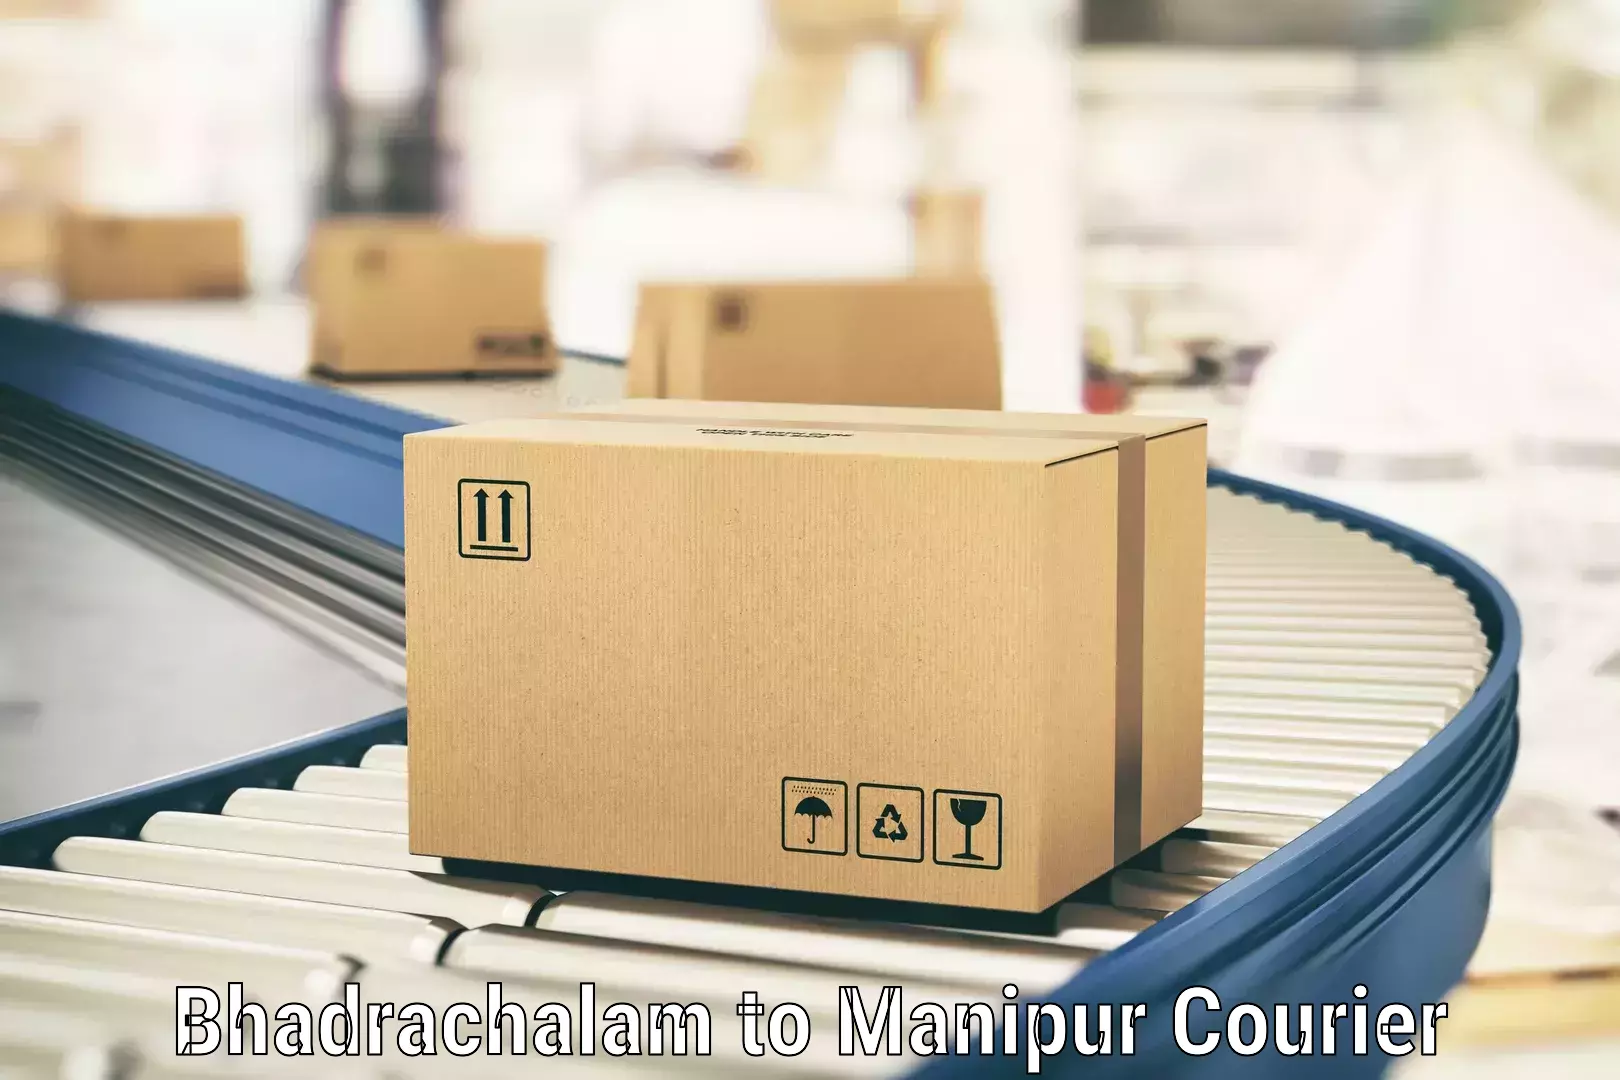 Bulk courier orders Bhadrachalam to Imphal